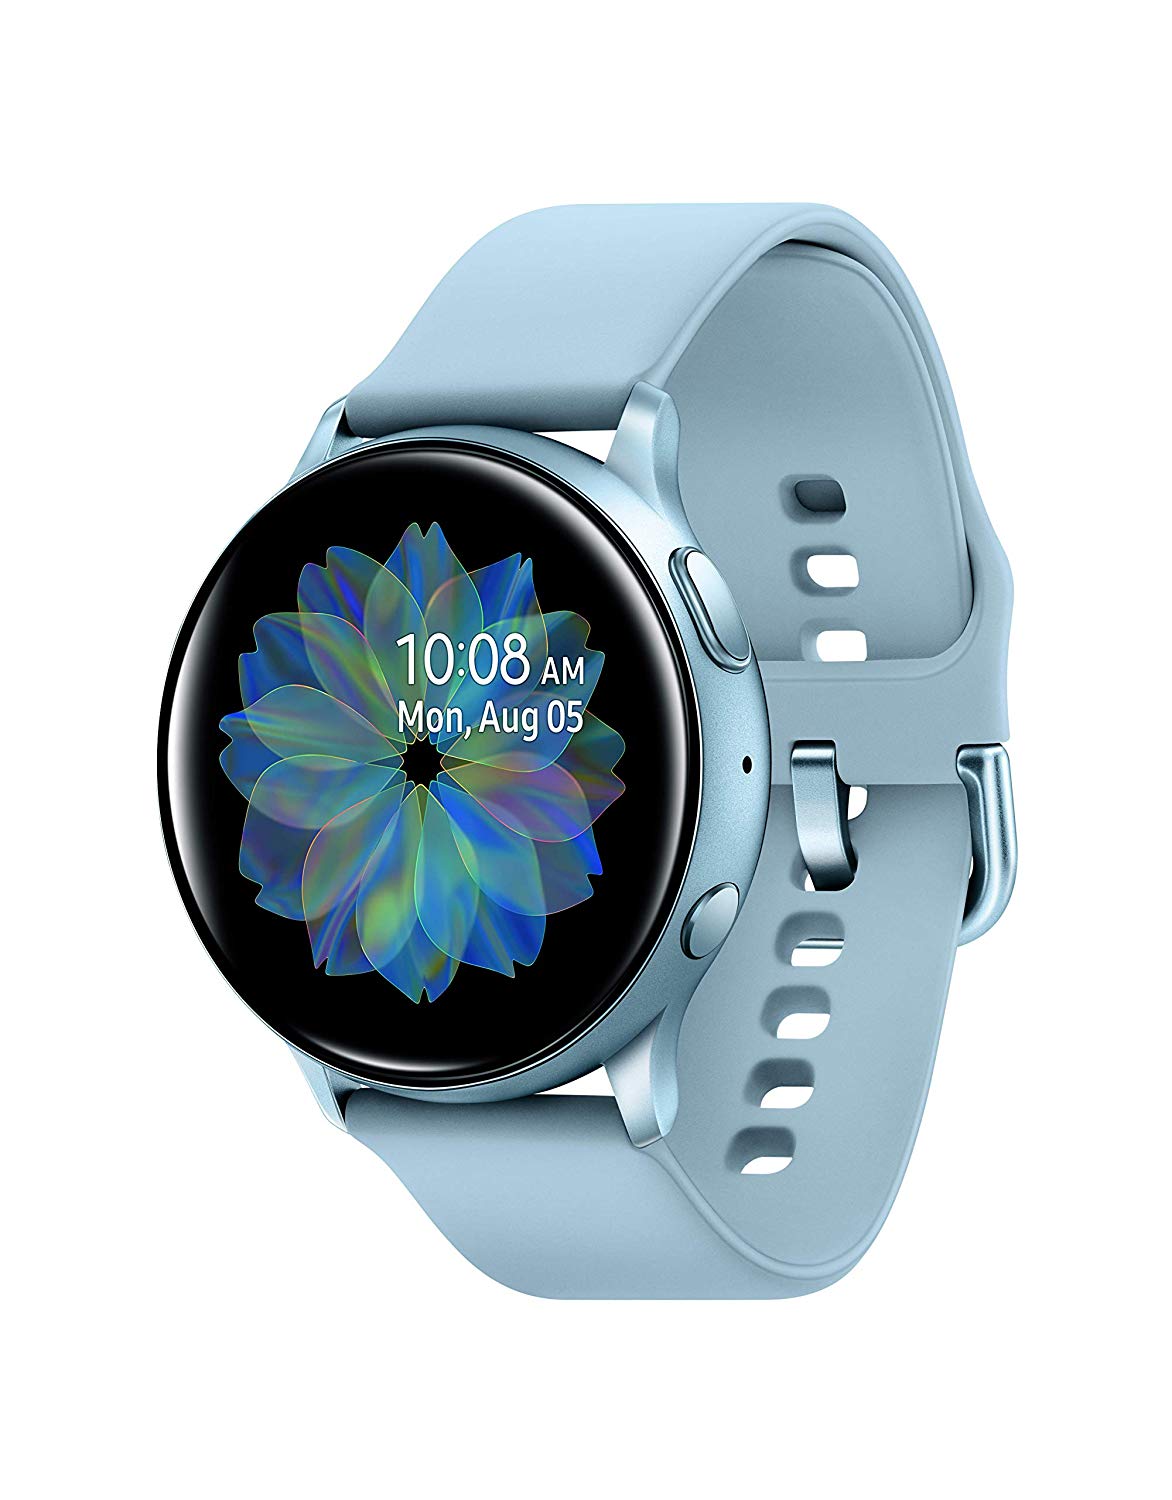 Samsung Galaxy Watch Active 2 (40mm) Full Specs and features